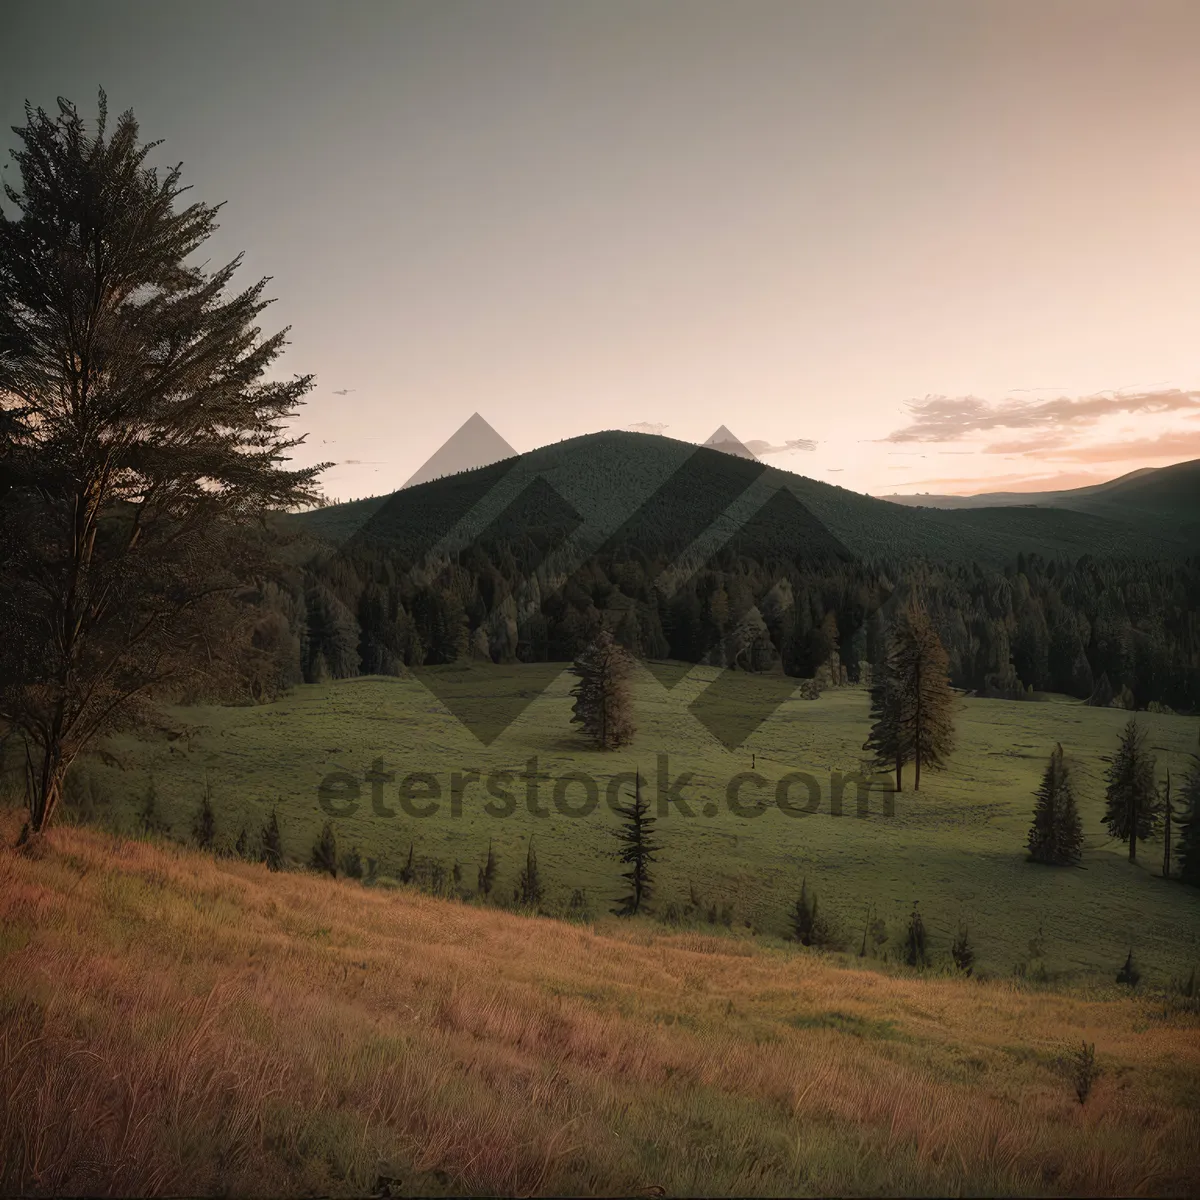 Picture of Picturesque Highland Mountain Landscape with Tree, Sky, and Grass